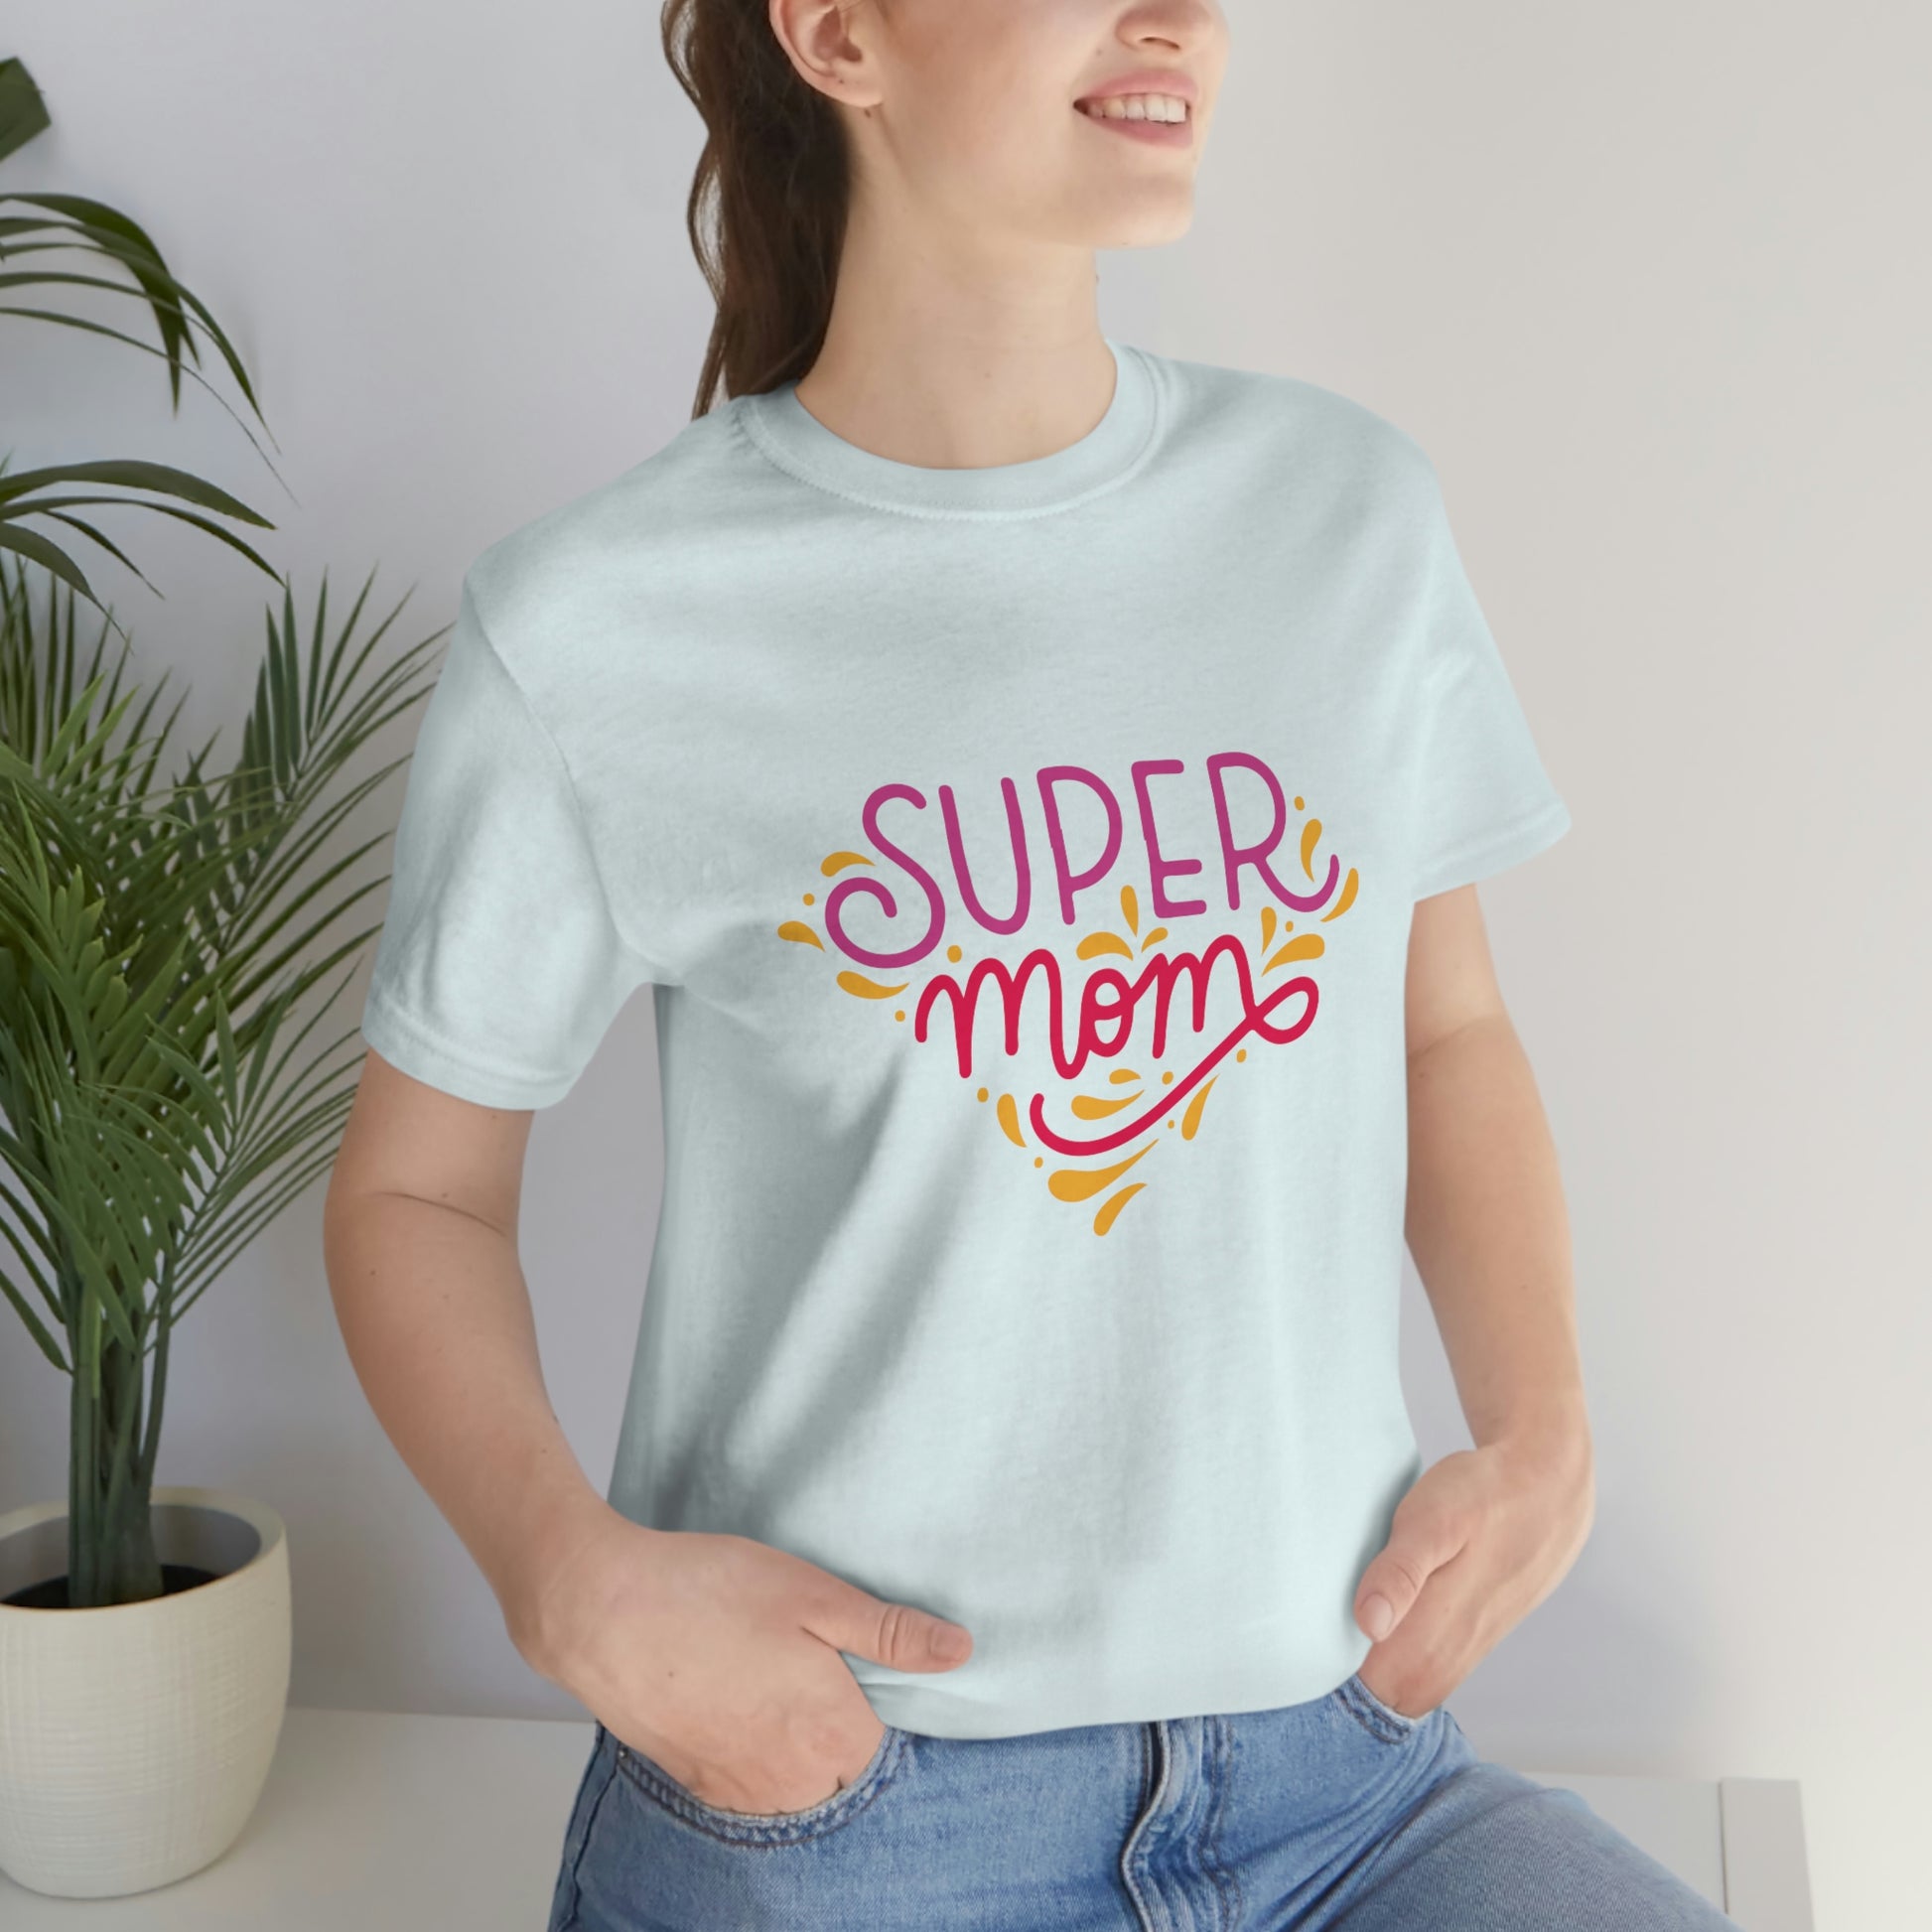 Super lovable design for the perfect Mothersday gift. Super mom ice blue T-shirt is carefully crafted with high-quality materials, is both comfortable and durable, making it a versatile addition to any mom's wardrobe.